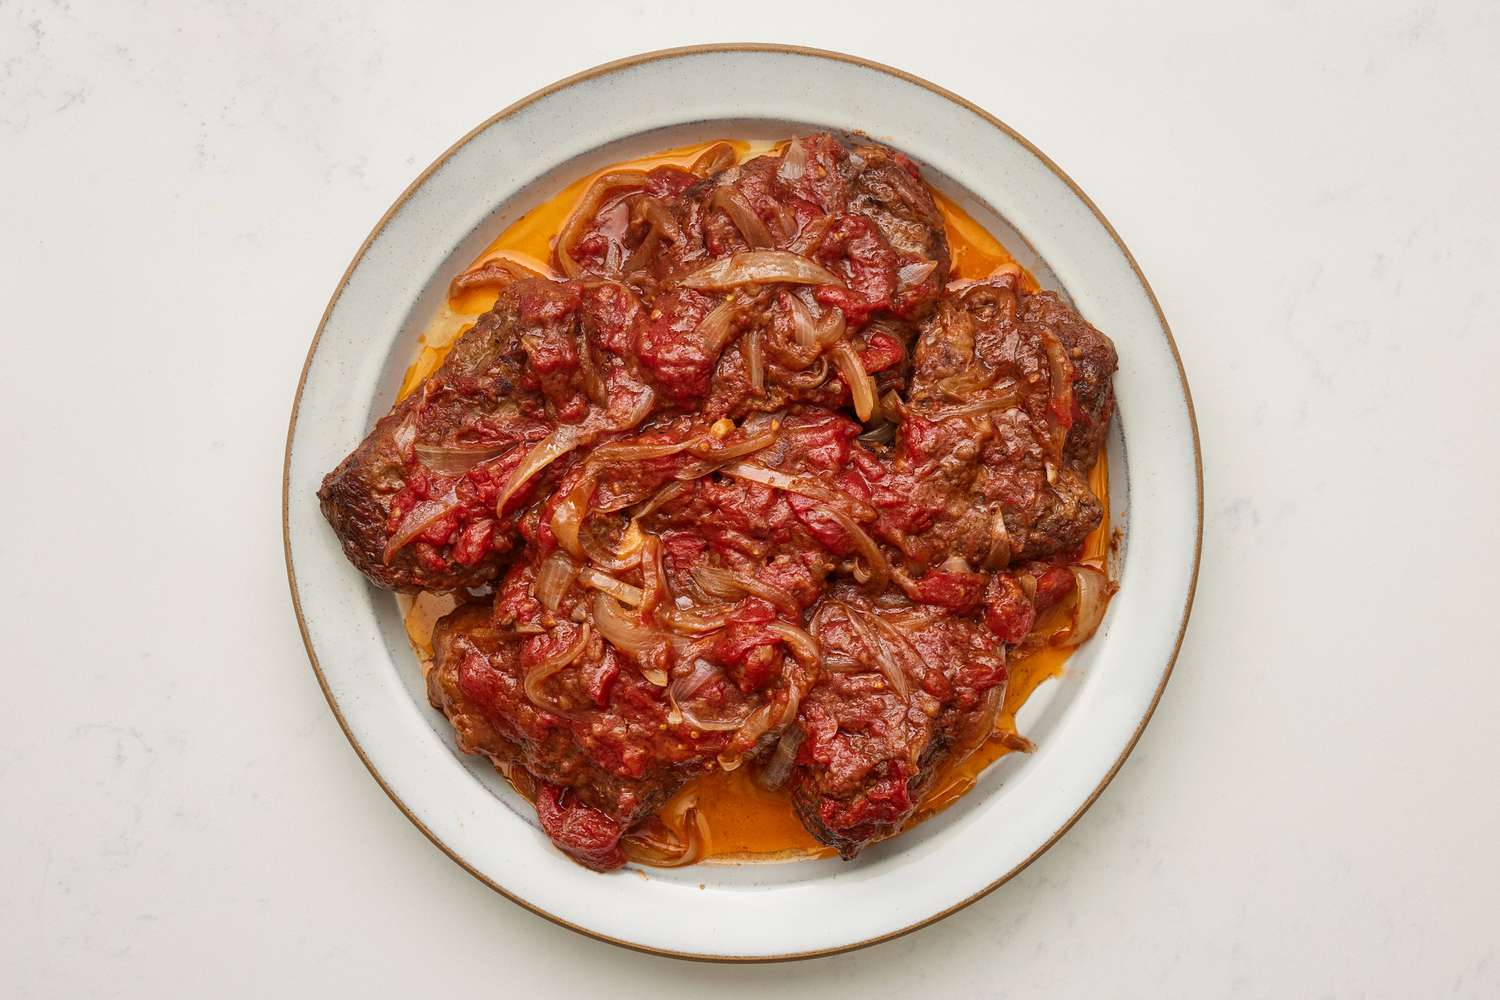 A plate of swiss steak topped with onion-tomato sauce